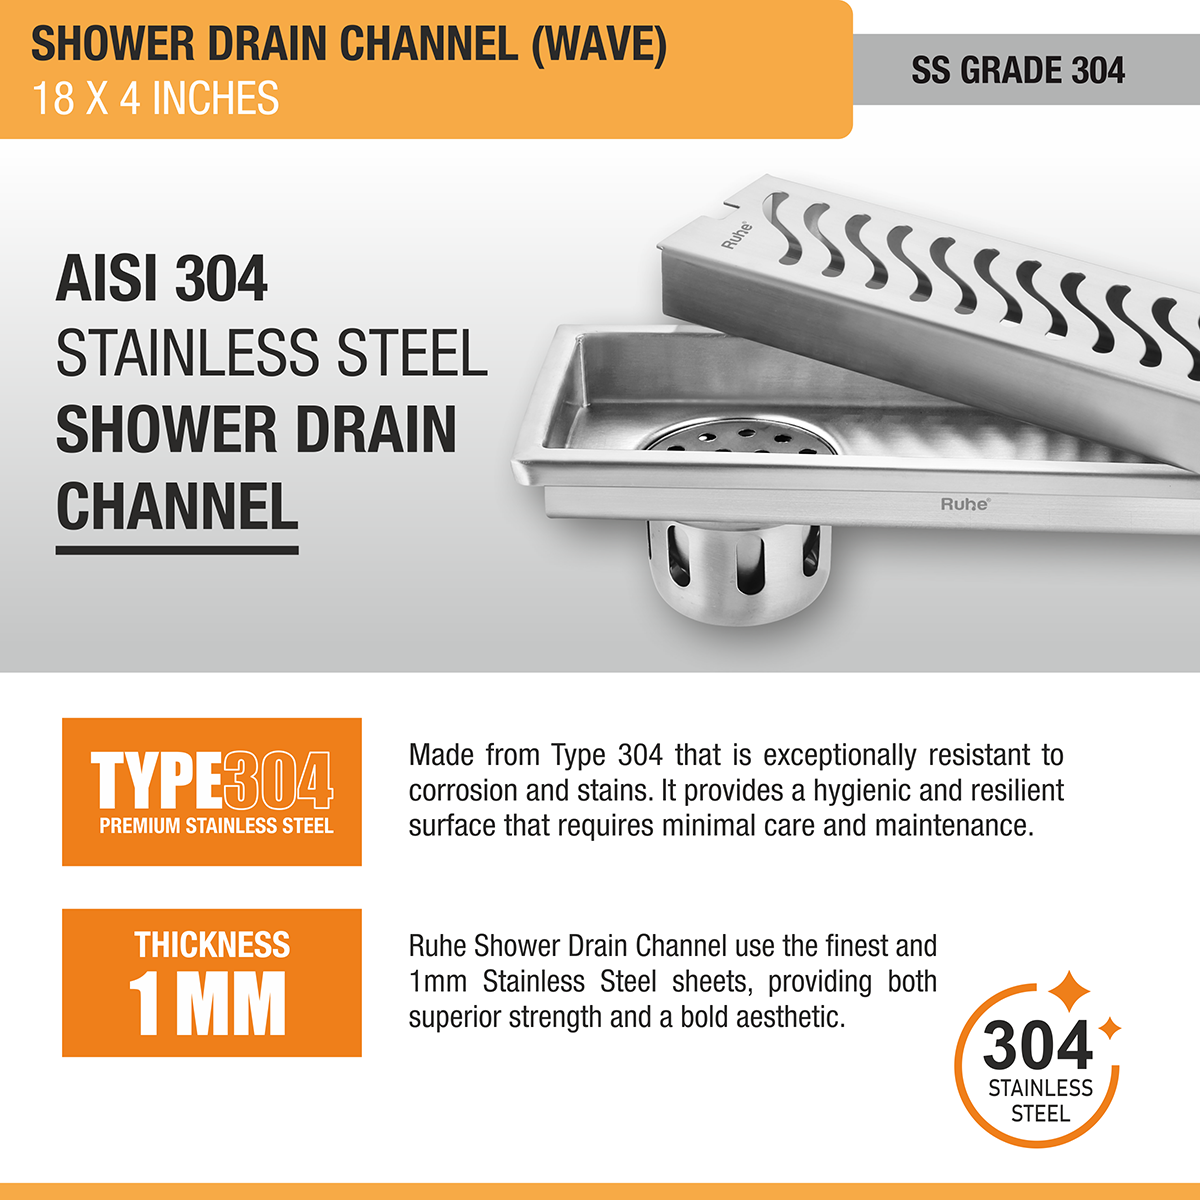 Wave Shower Drain Channel (18 X 4 Inches) with Cockroach Trap (304 Grade)stainless steel